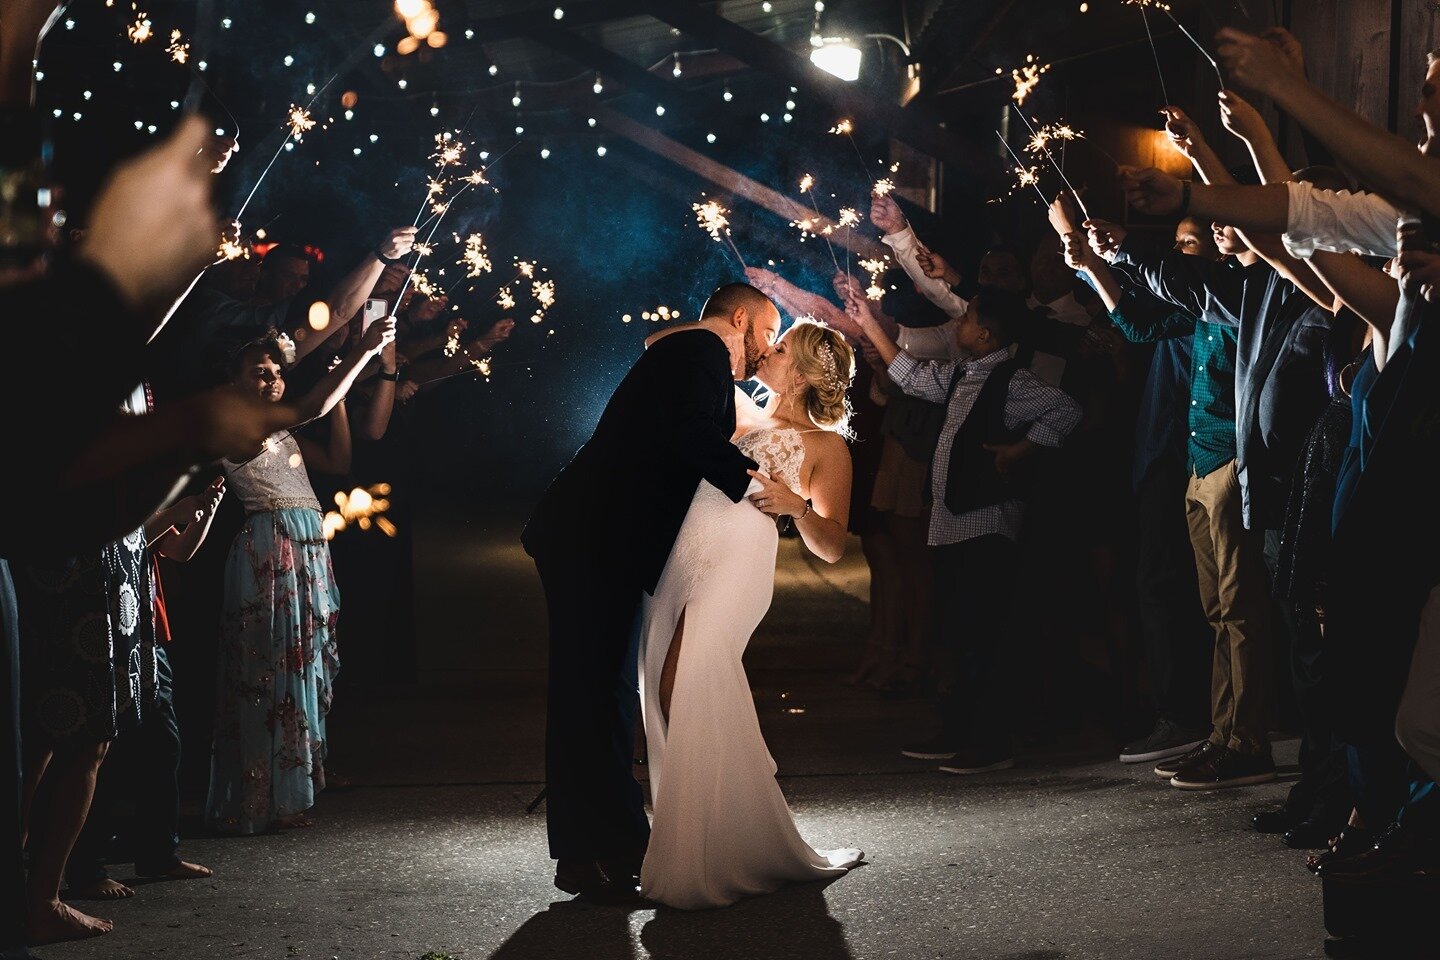 Oh how I love that end of the night shot! This is still one of my favorite sparkler exits ever!